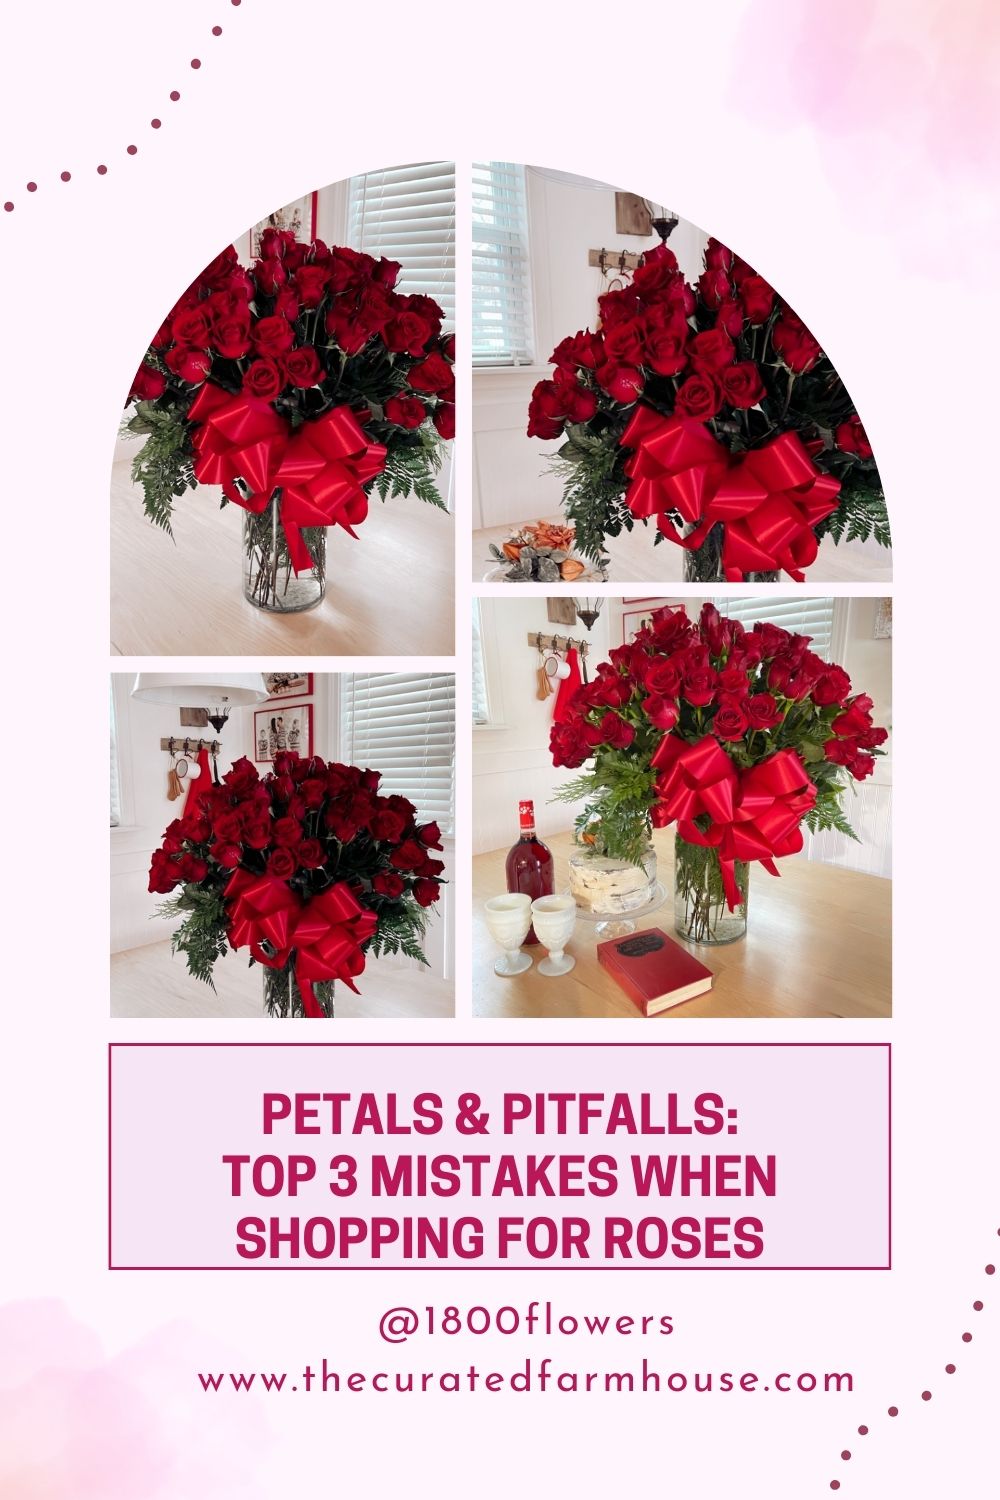 Petals & Pitfalls: Top 3 Mistakes When Shopping for Roses